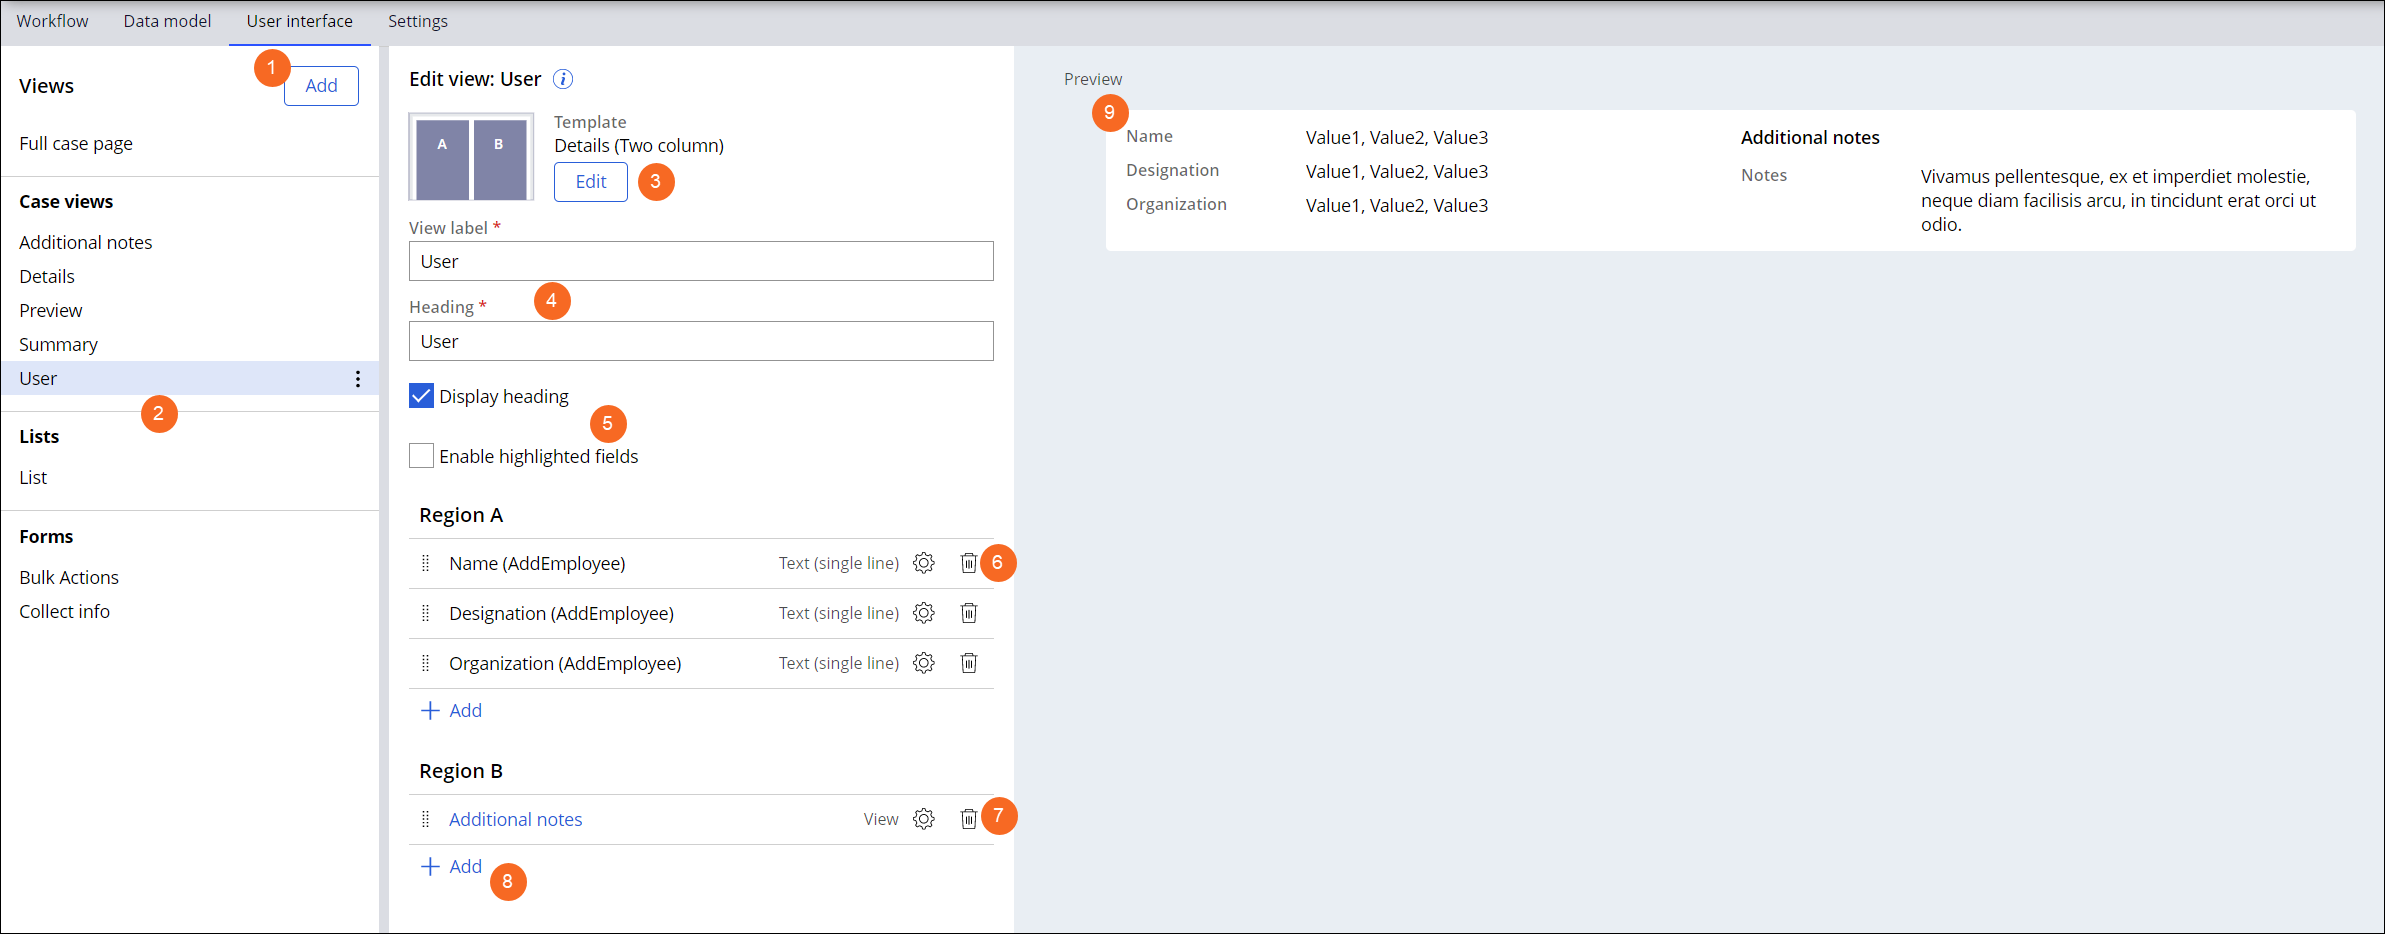 The User Interface tab includes a view list in the left third, a central edit pane, and a preview pane to the right.